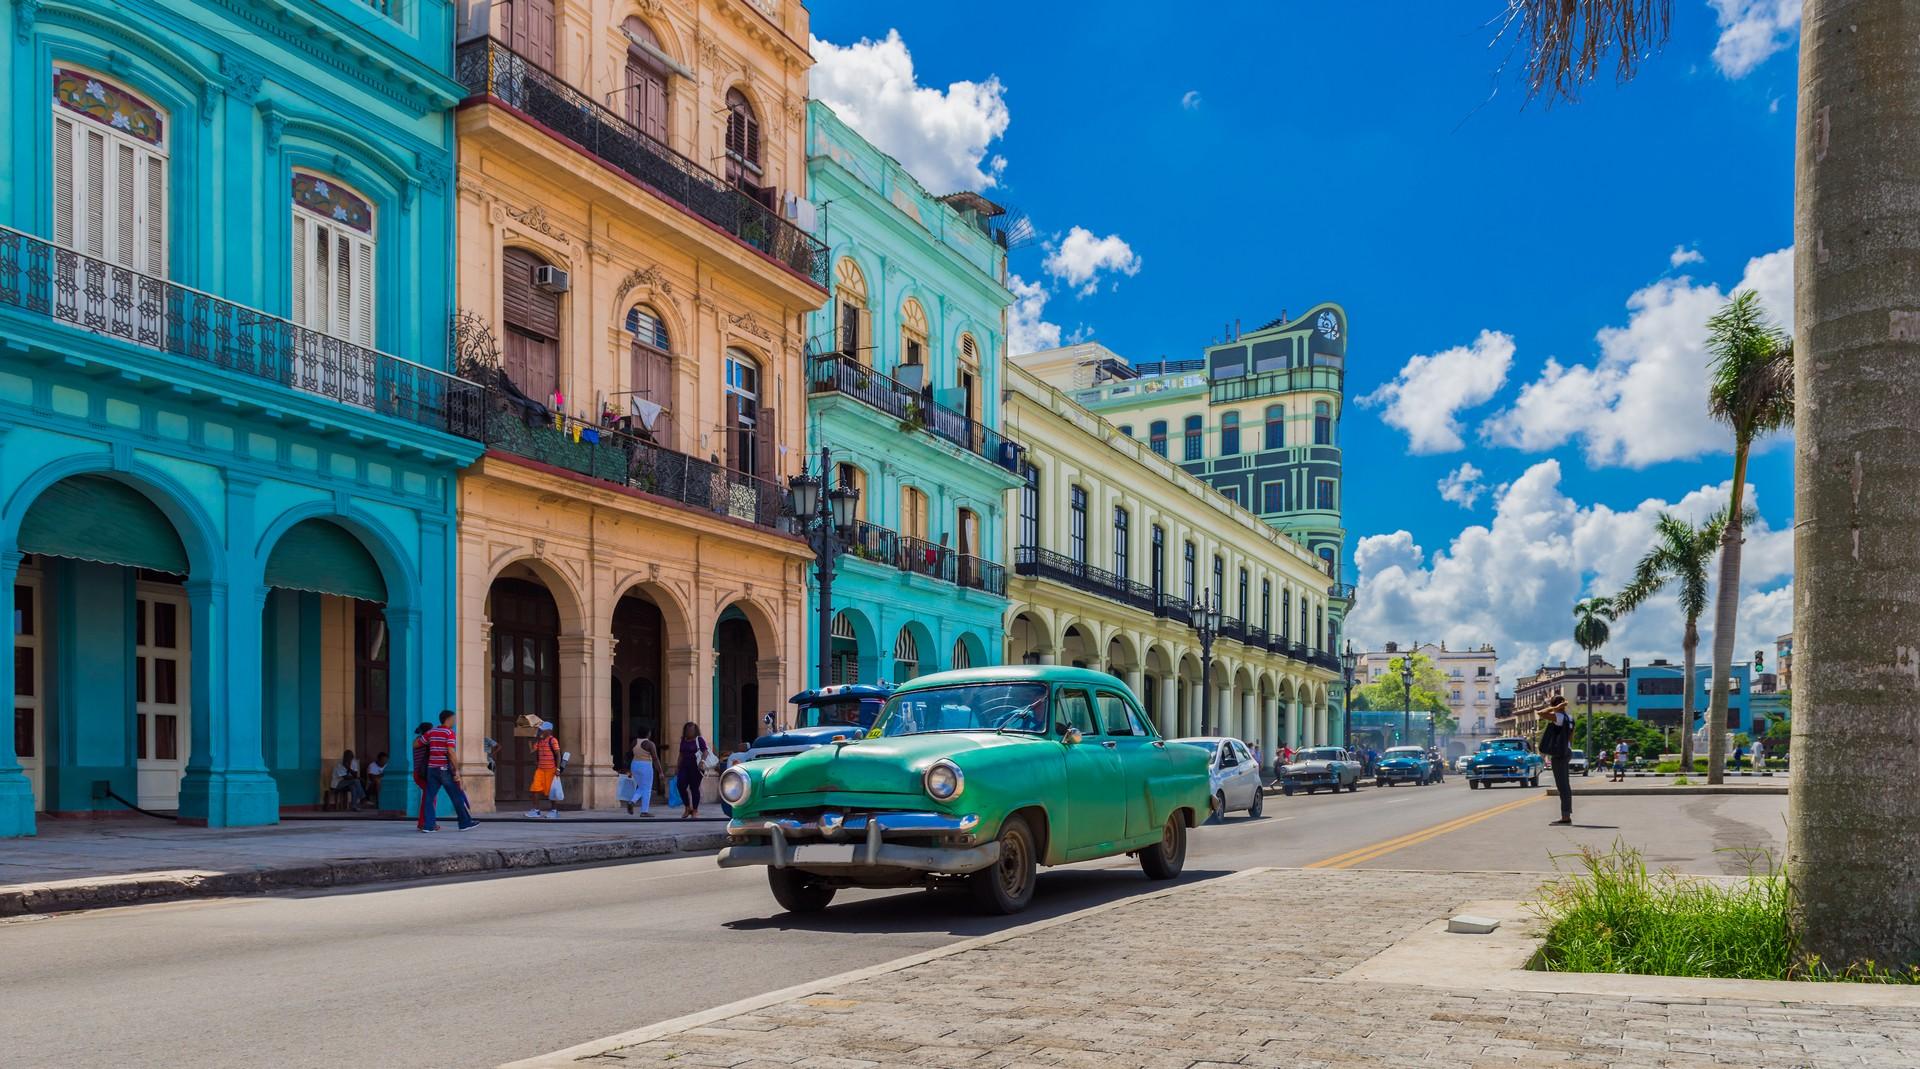 Architecture in Havana in sunny weather with few clouds